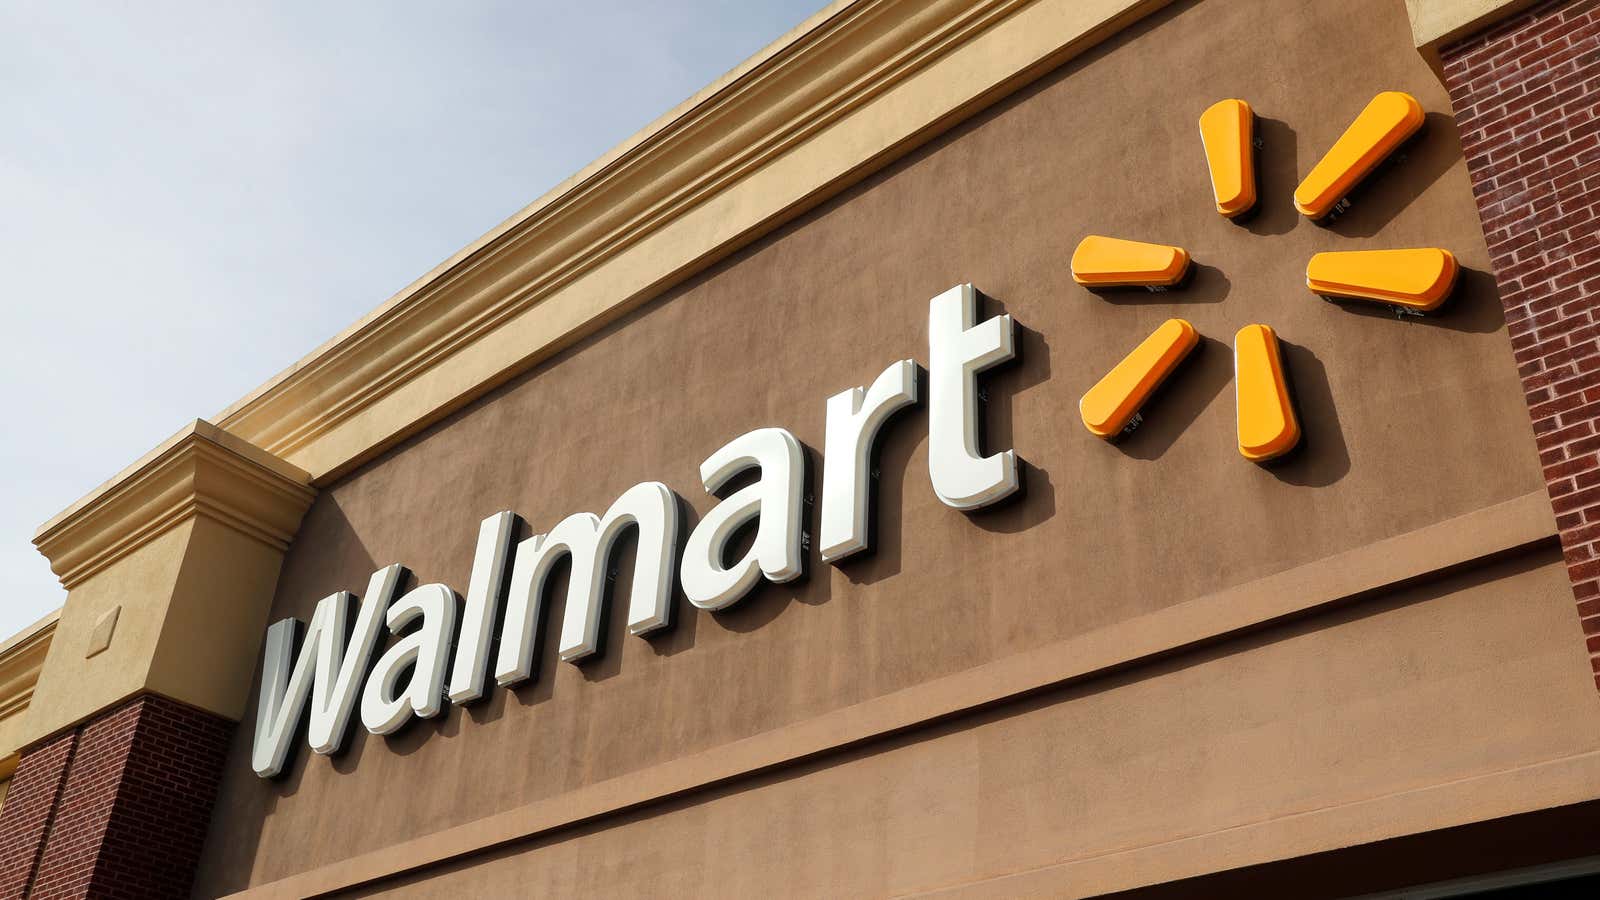 Walmart still has work to do on its “culture of inclusion.”